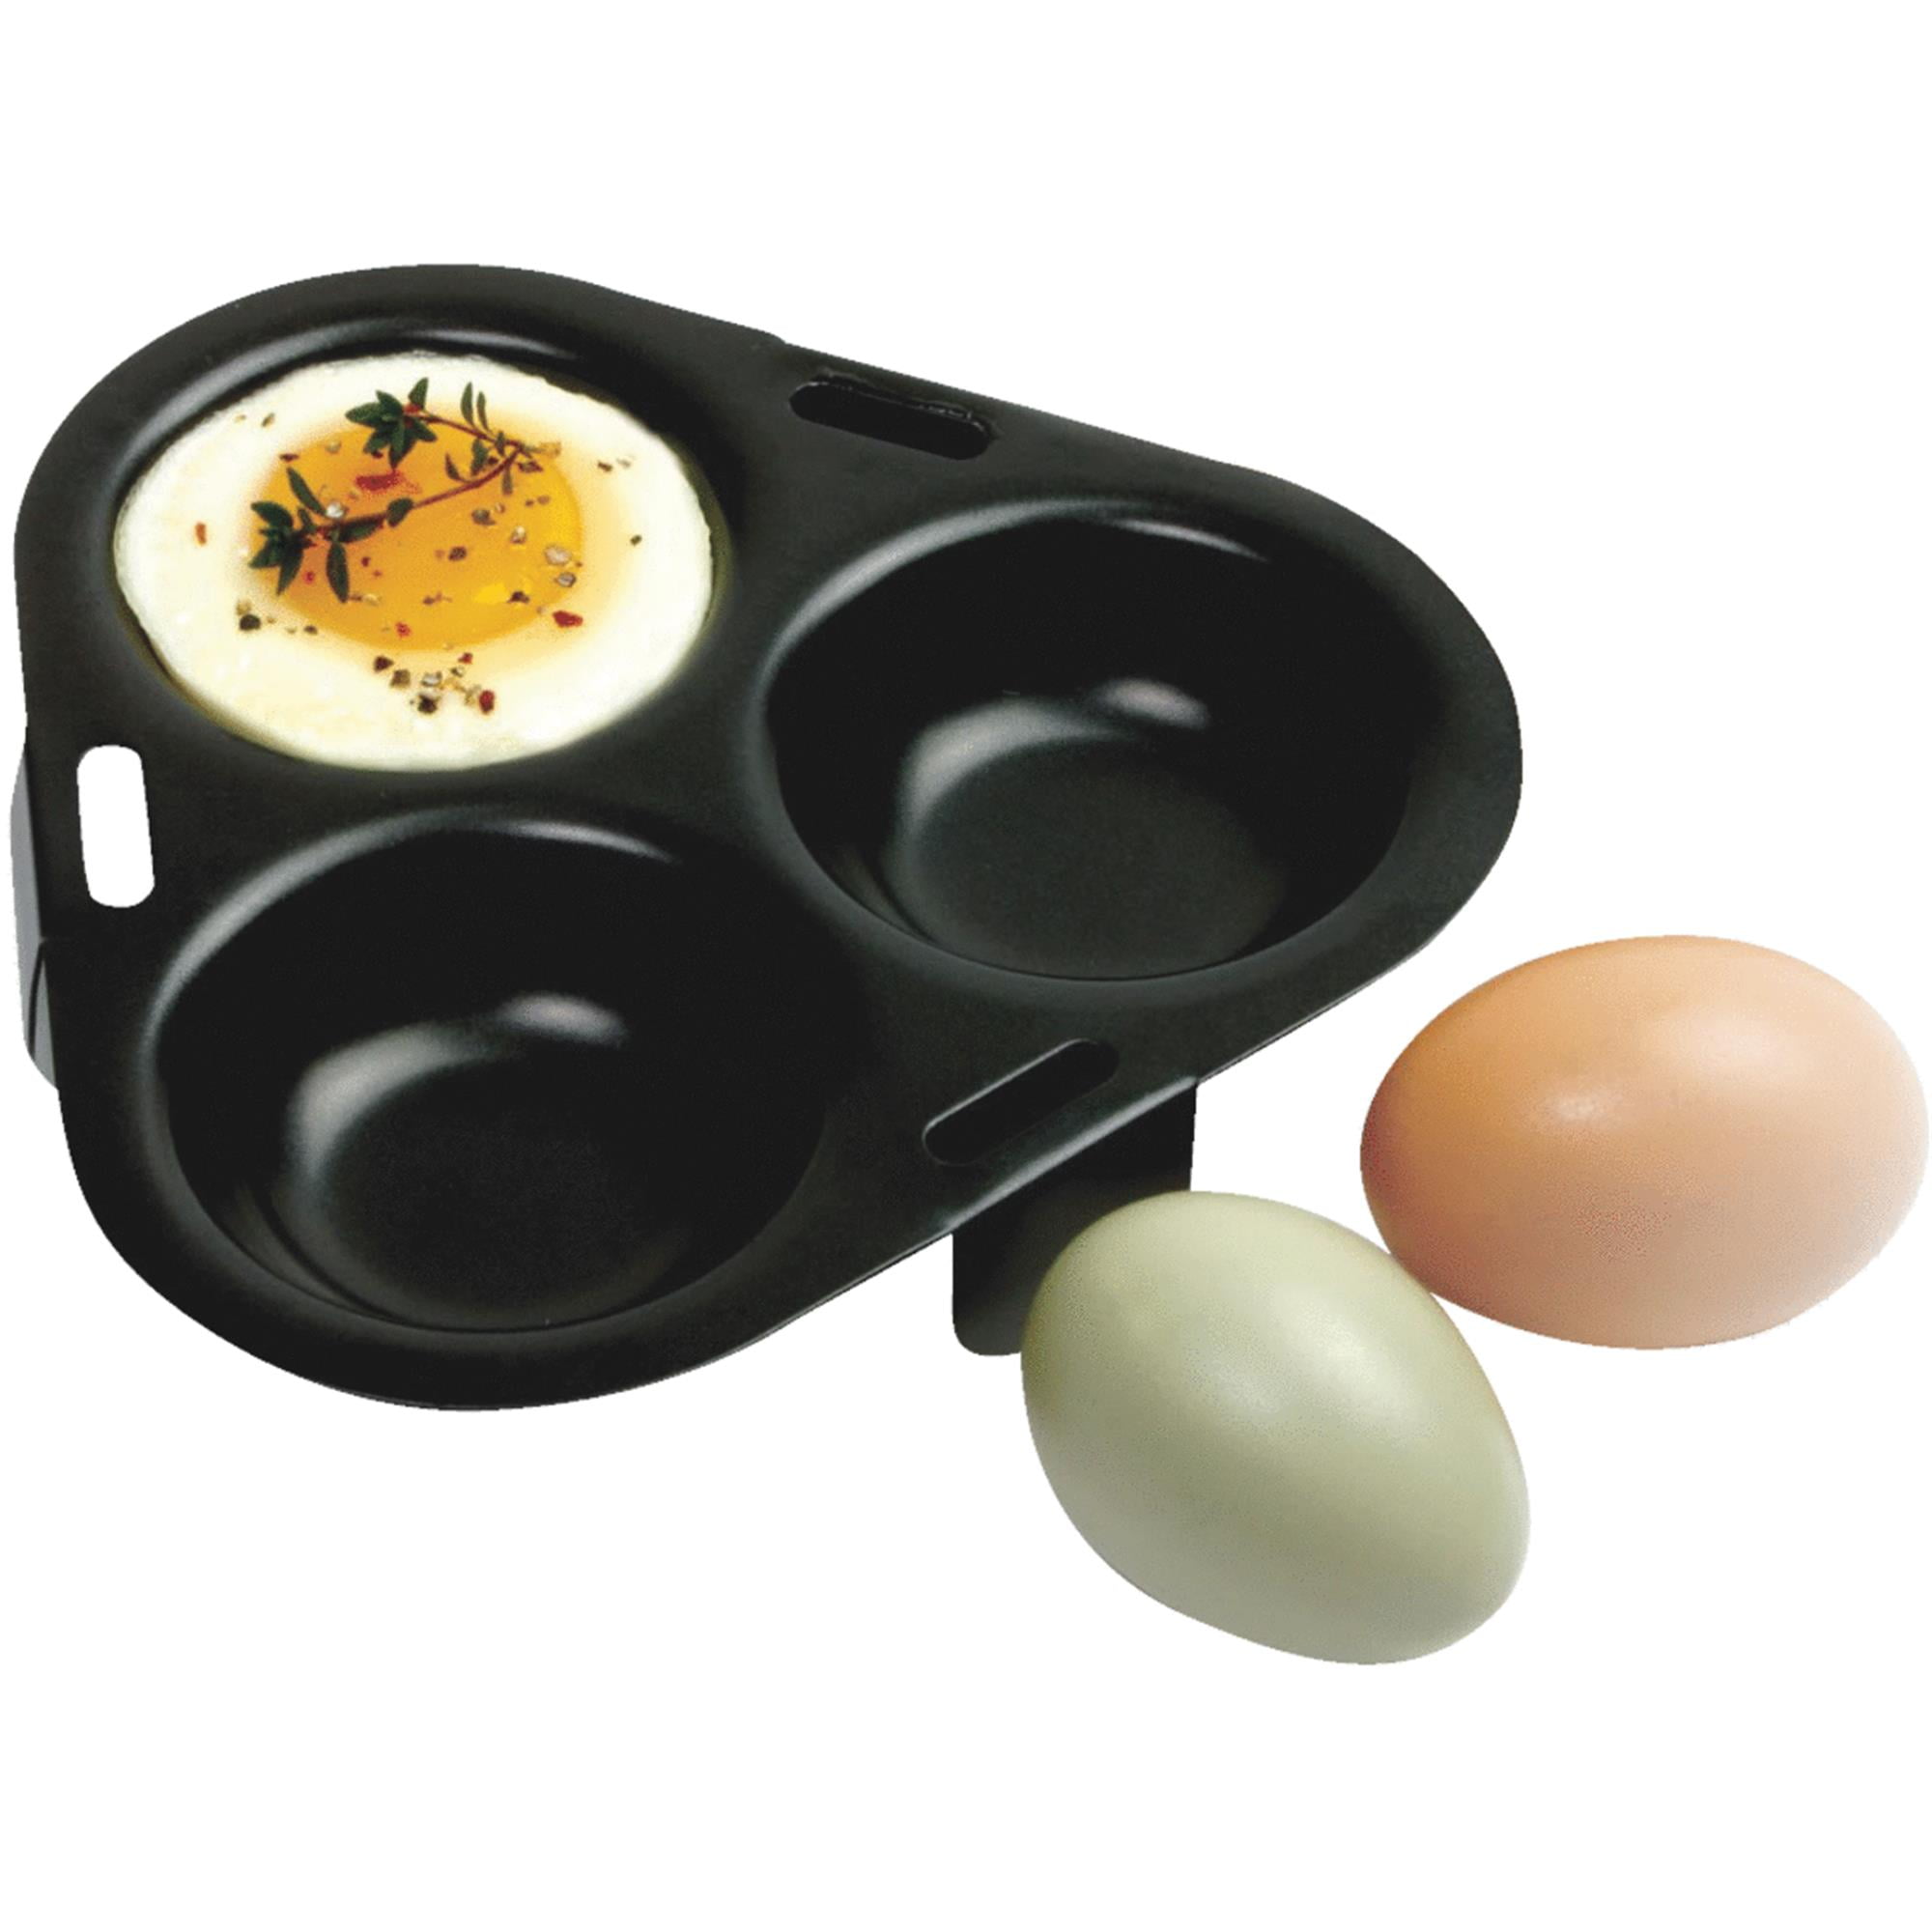 4 Pack Egg Cooker Set Non Stick Silicone Egg Poaching Cup Poached